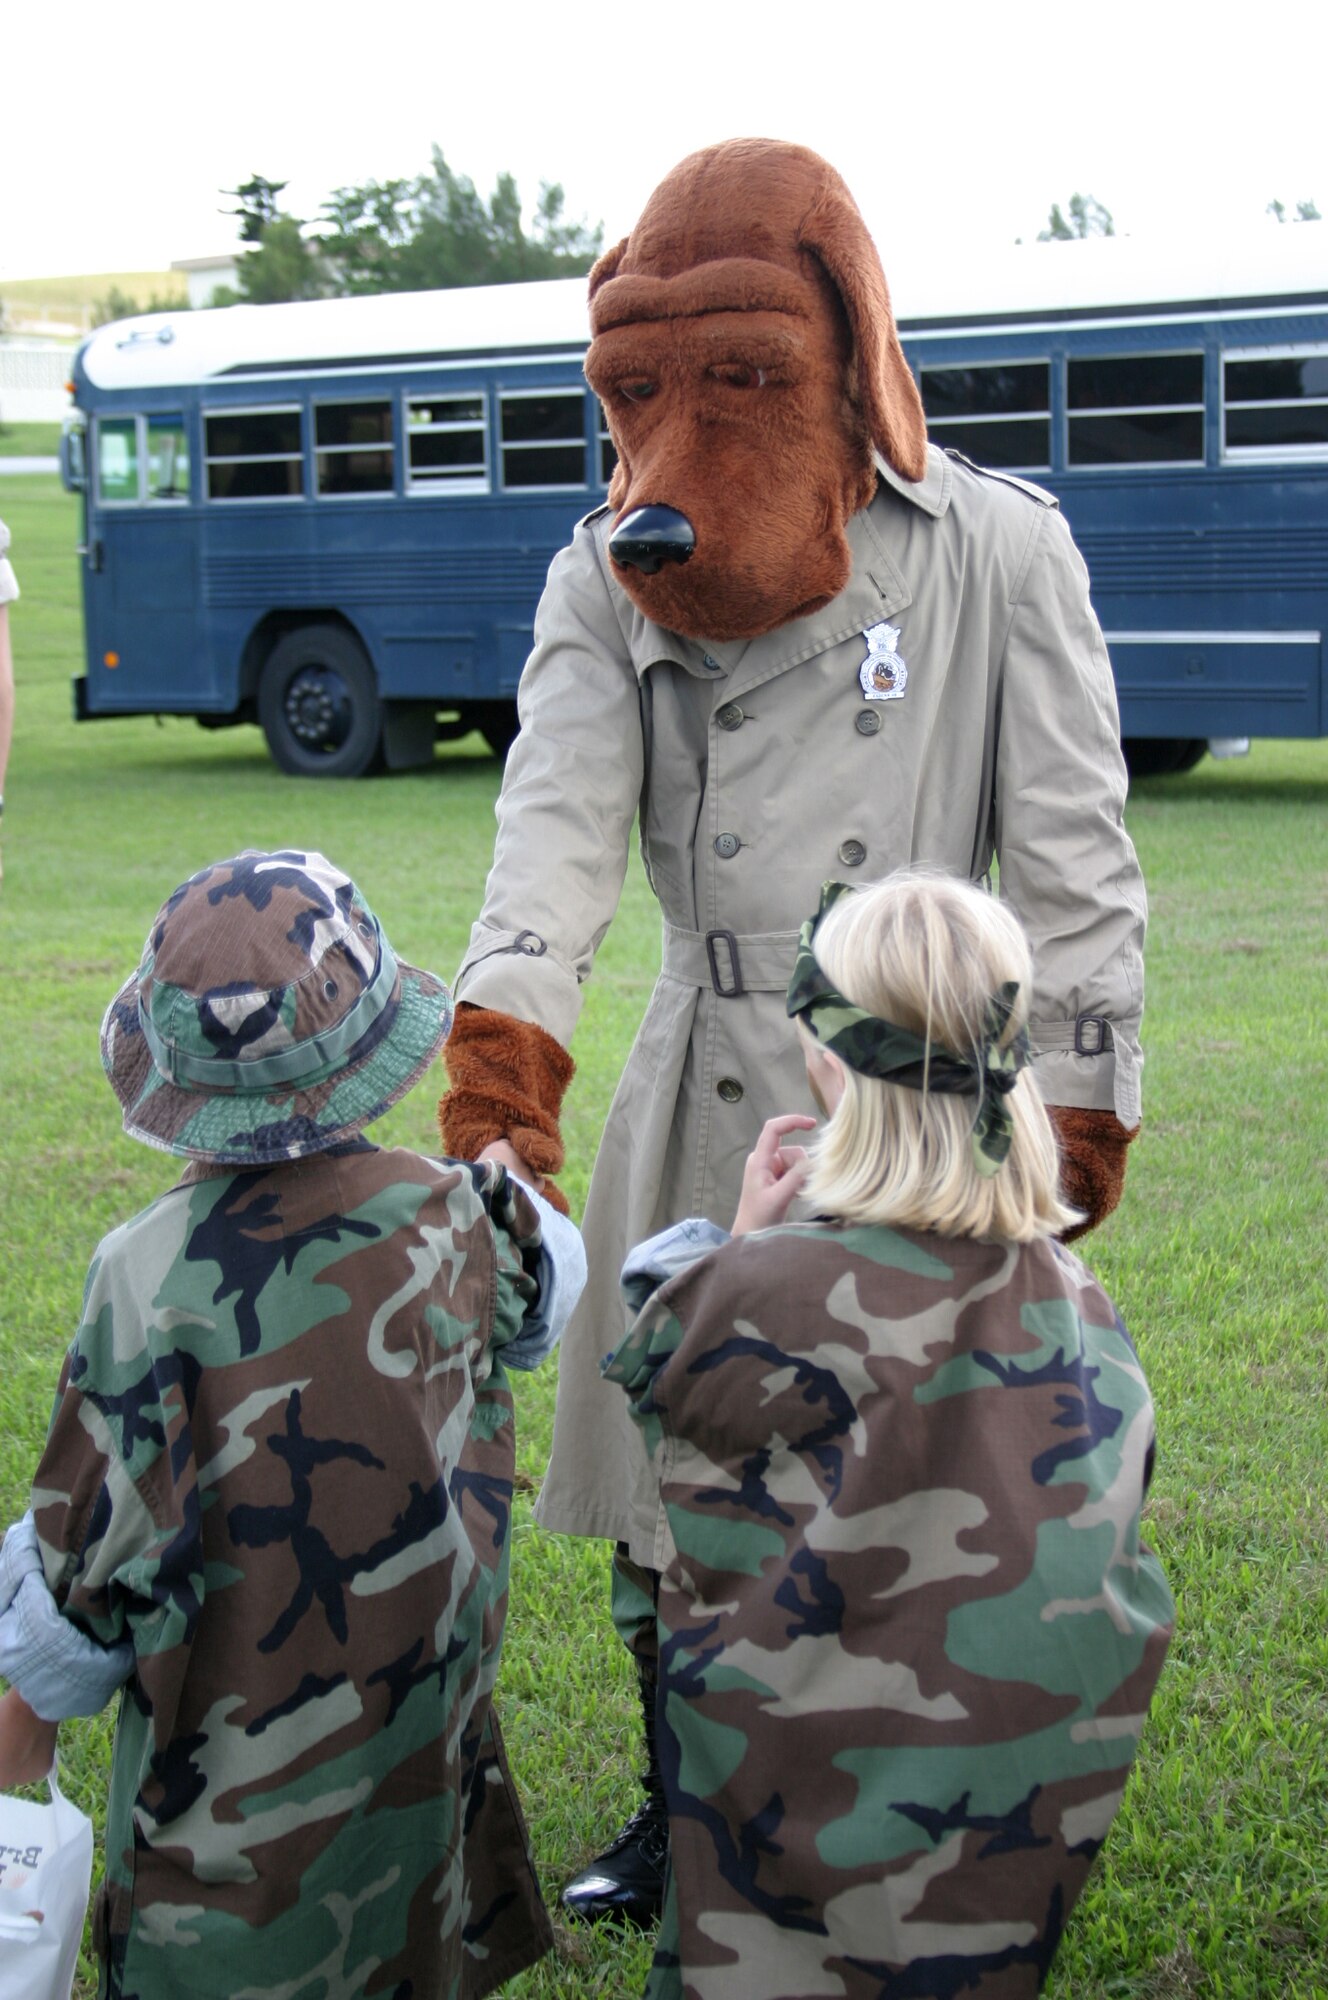 McGruff the Crime Dog shakes hands with young deployers during Skoshi Warrior on Sept. 29. The 18th Security Forces Squadron was among many base agencies providing support for this event.
(U.S. Air Force/Senior Airman Nestor Cruz)